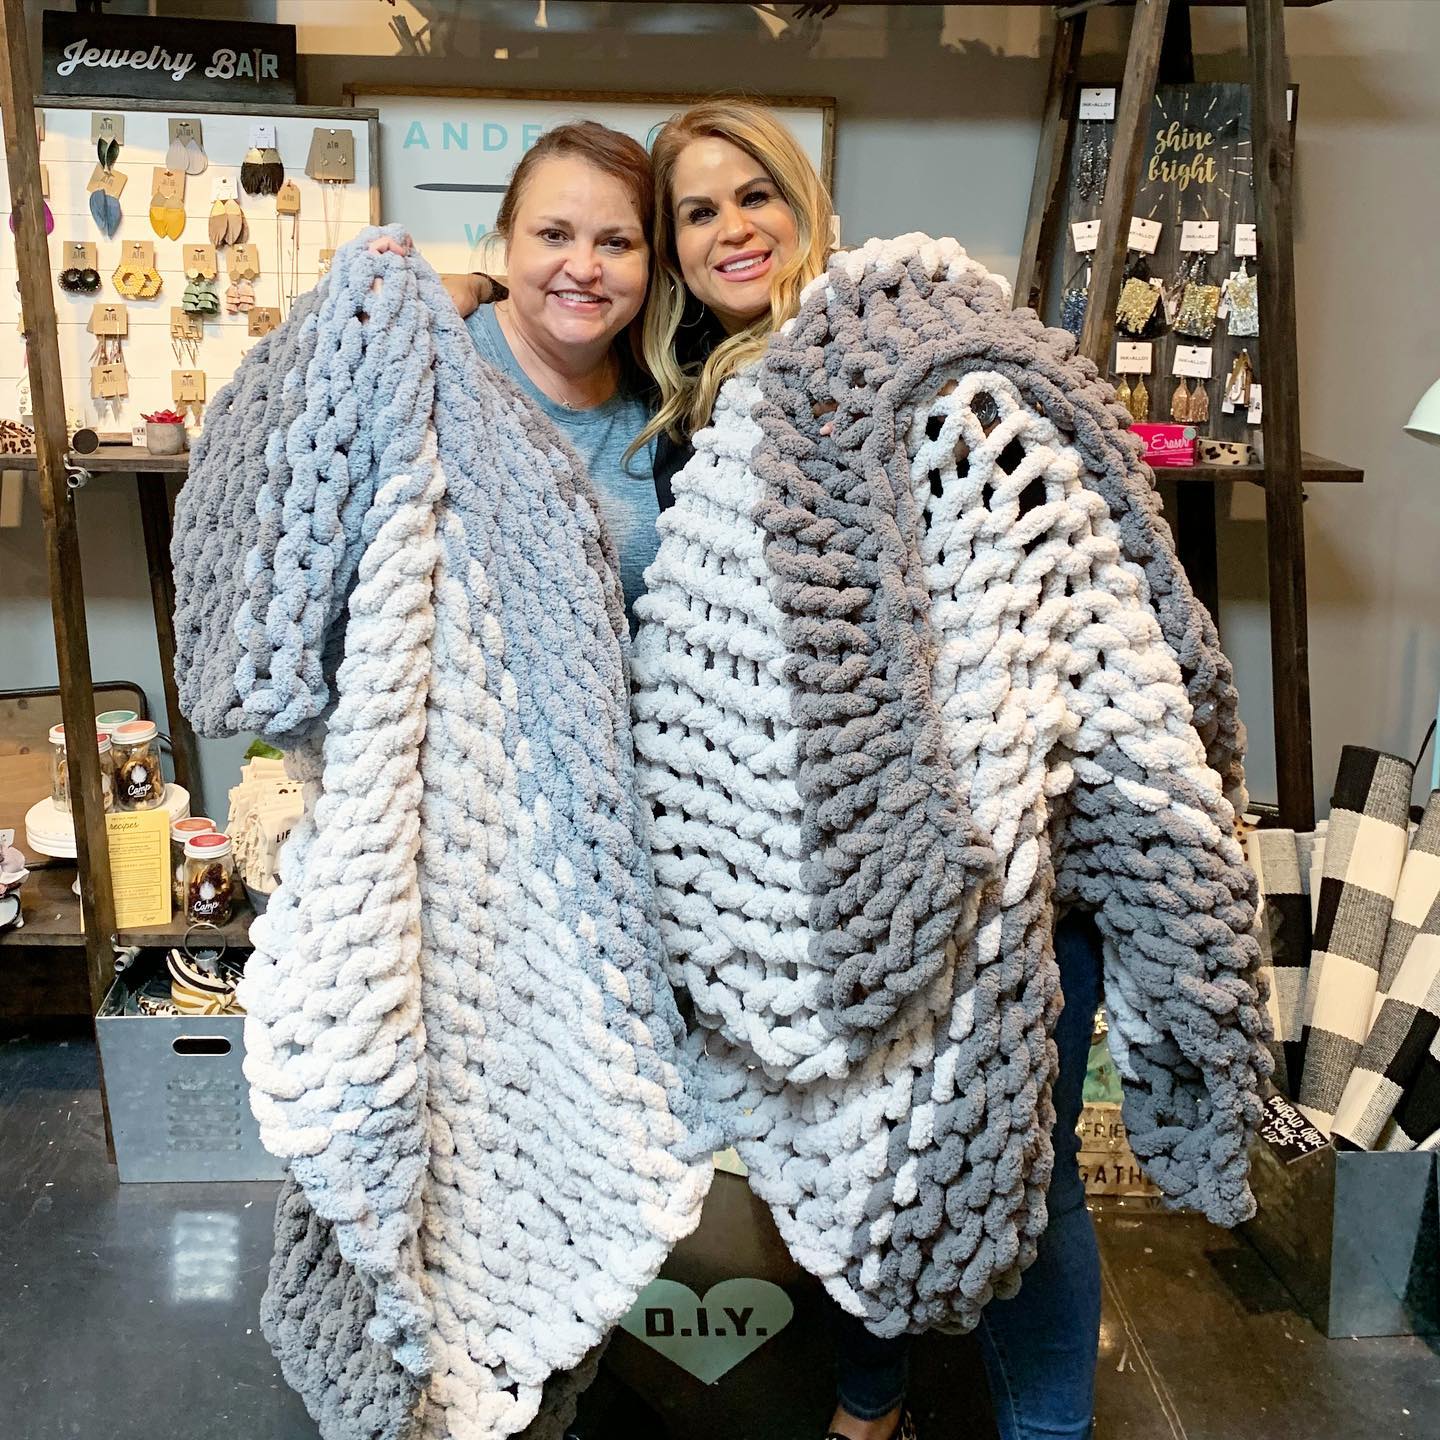 In AR Workshop, two happy ladies show off their crocheted blanket